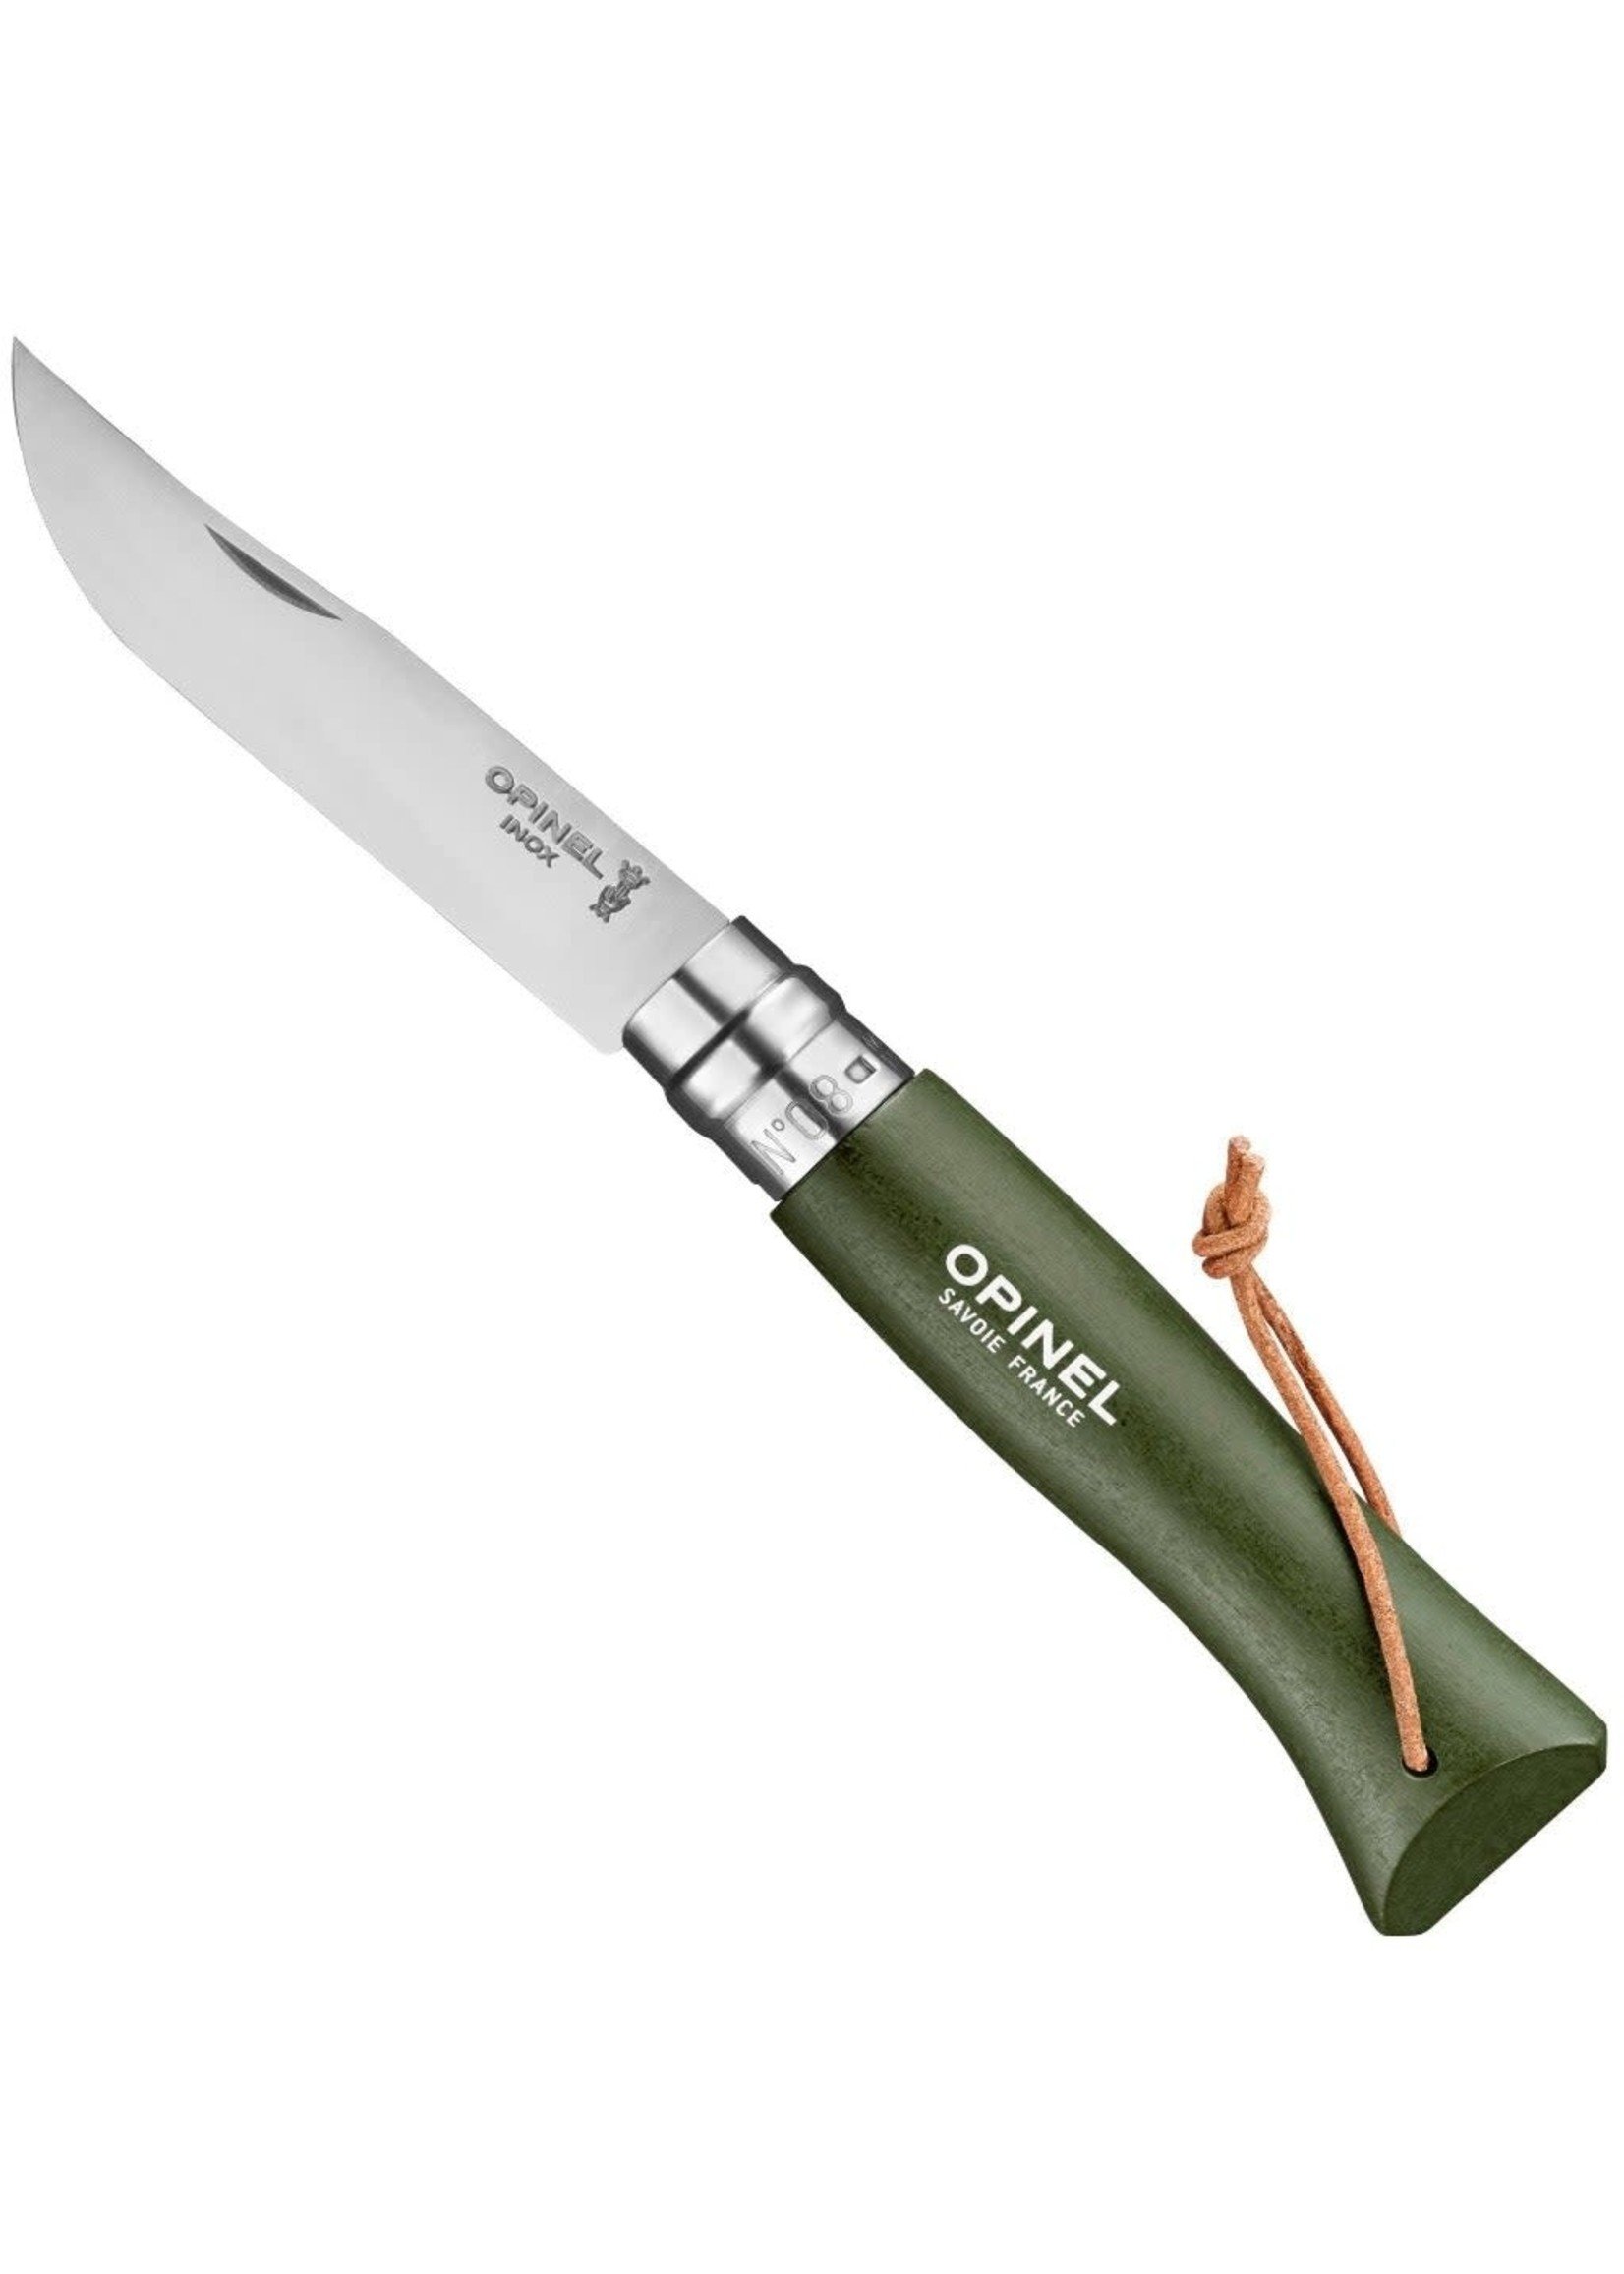 OPINEL NO. 8 STAINLESS FOREST GREEN KNIFE